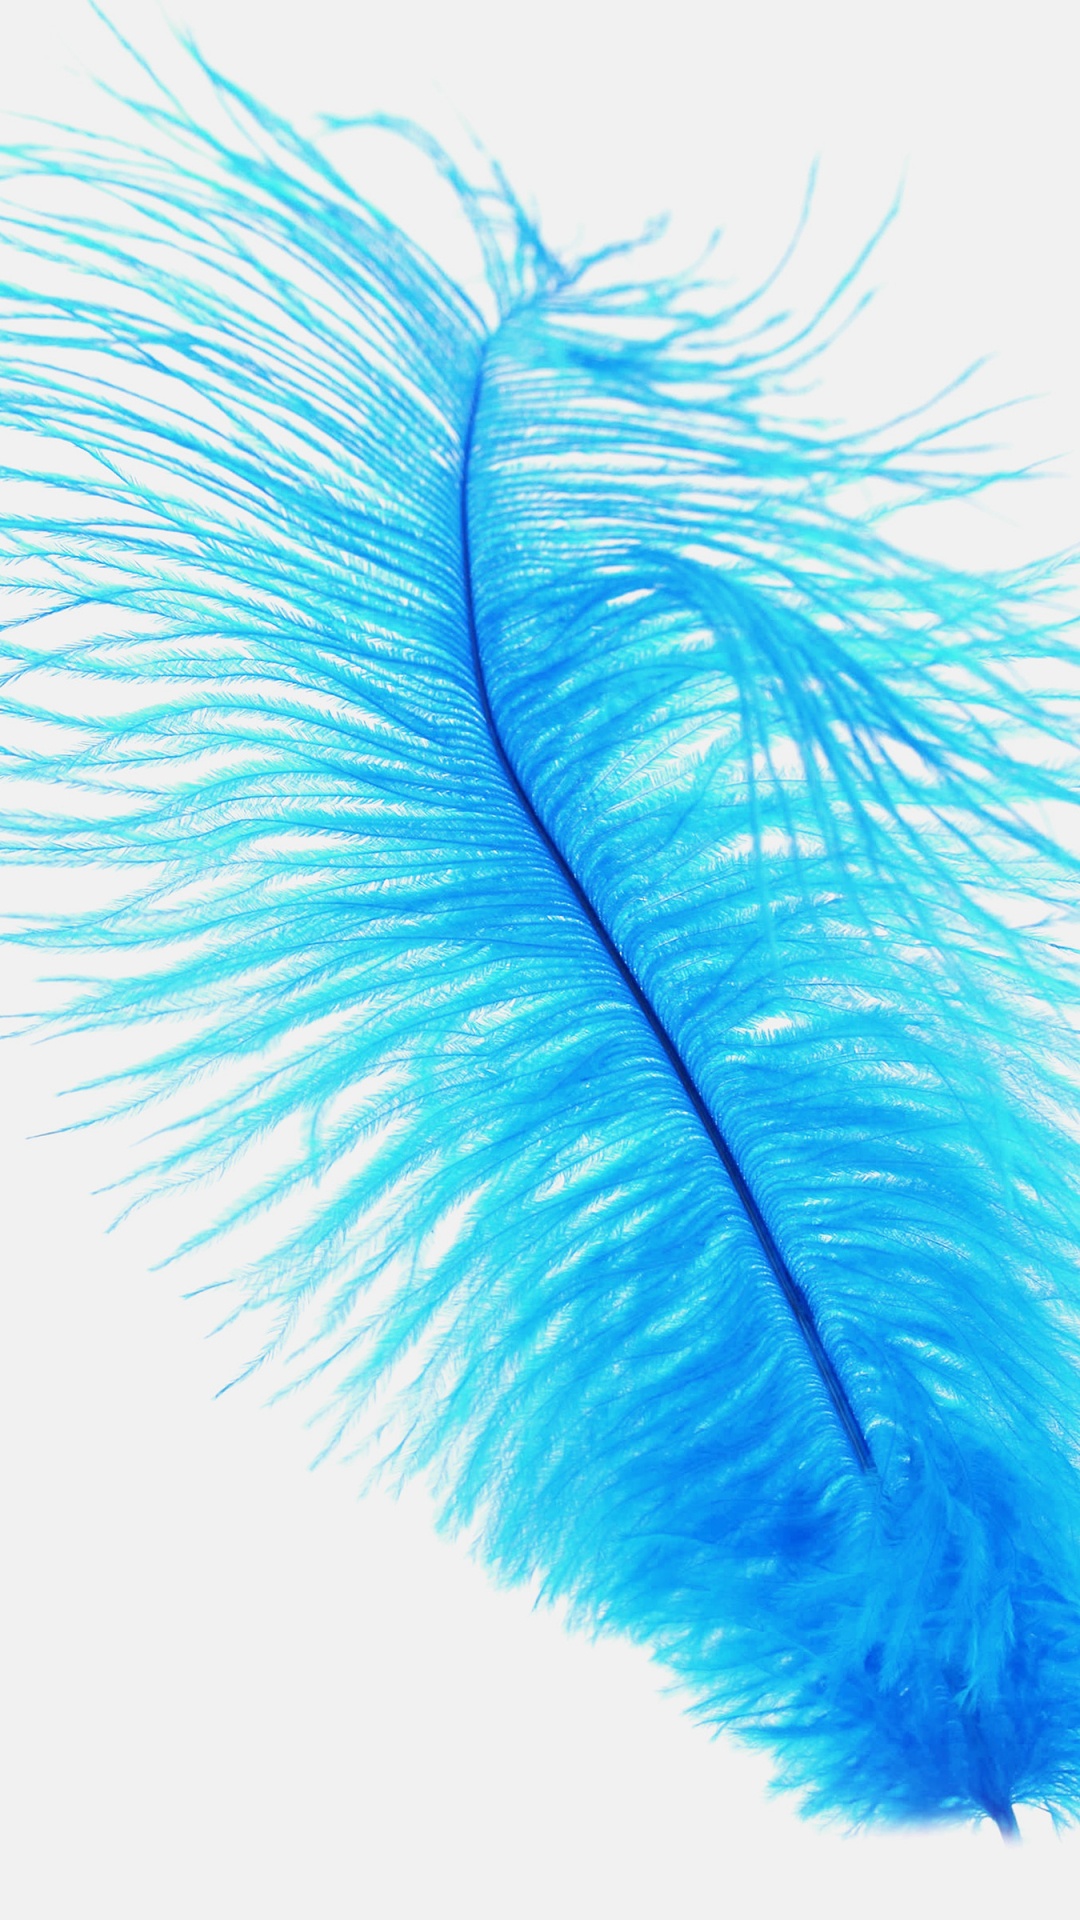 Brown Feather on White Background. Wallpaper in 1080x1920 Resolution